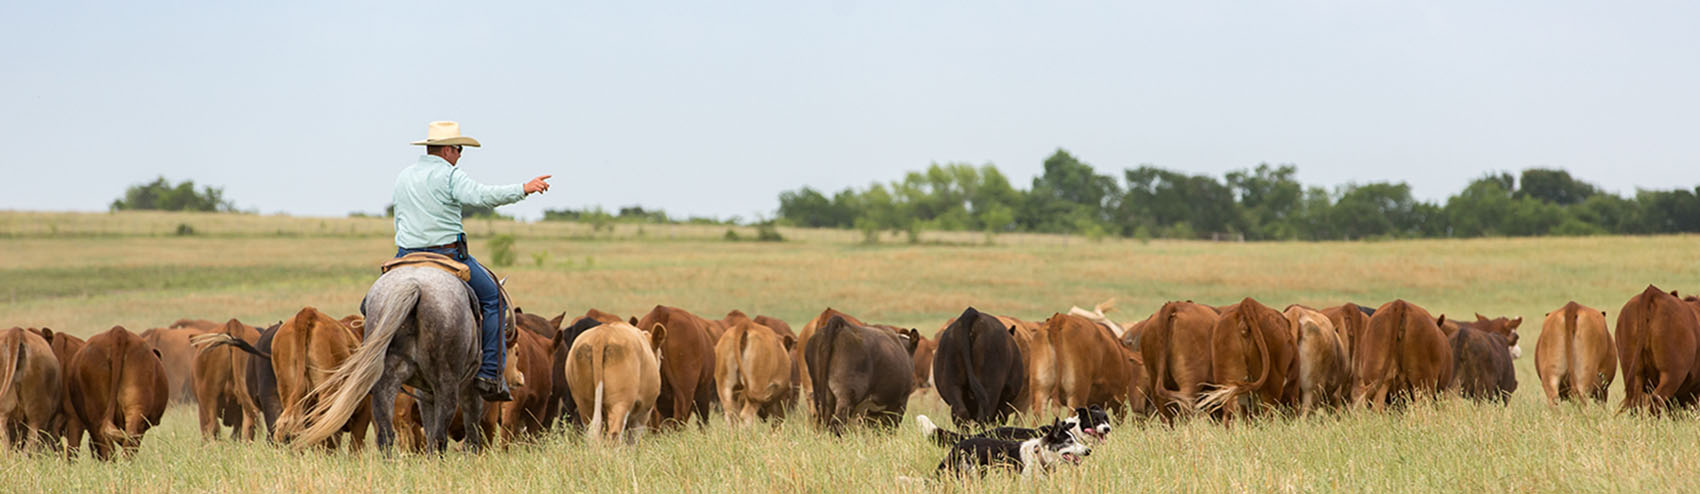 Rancher working cattle with dogs